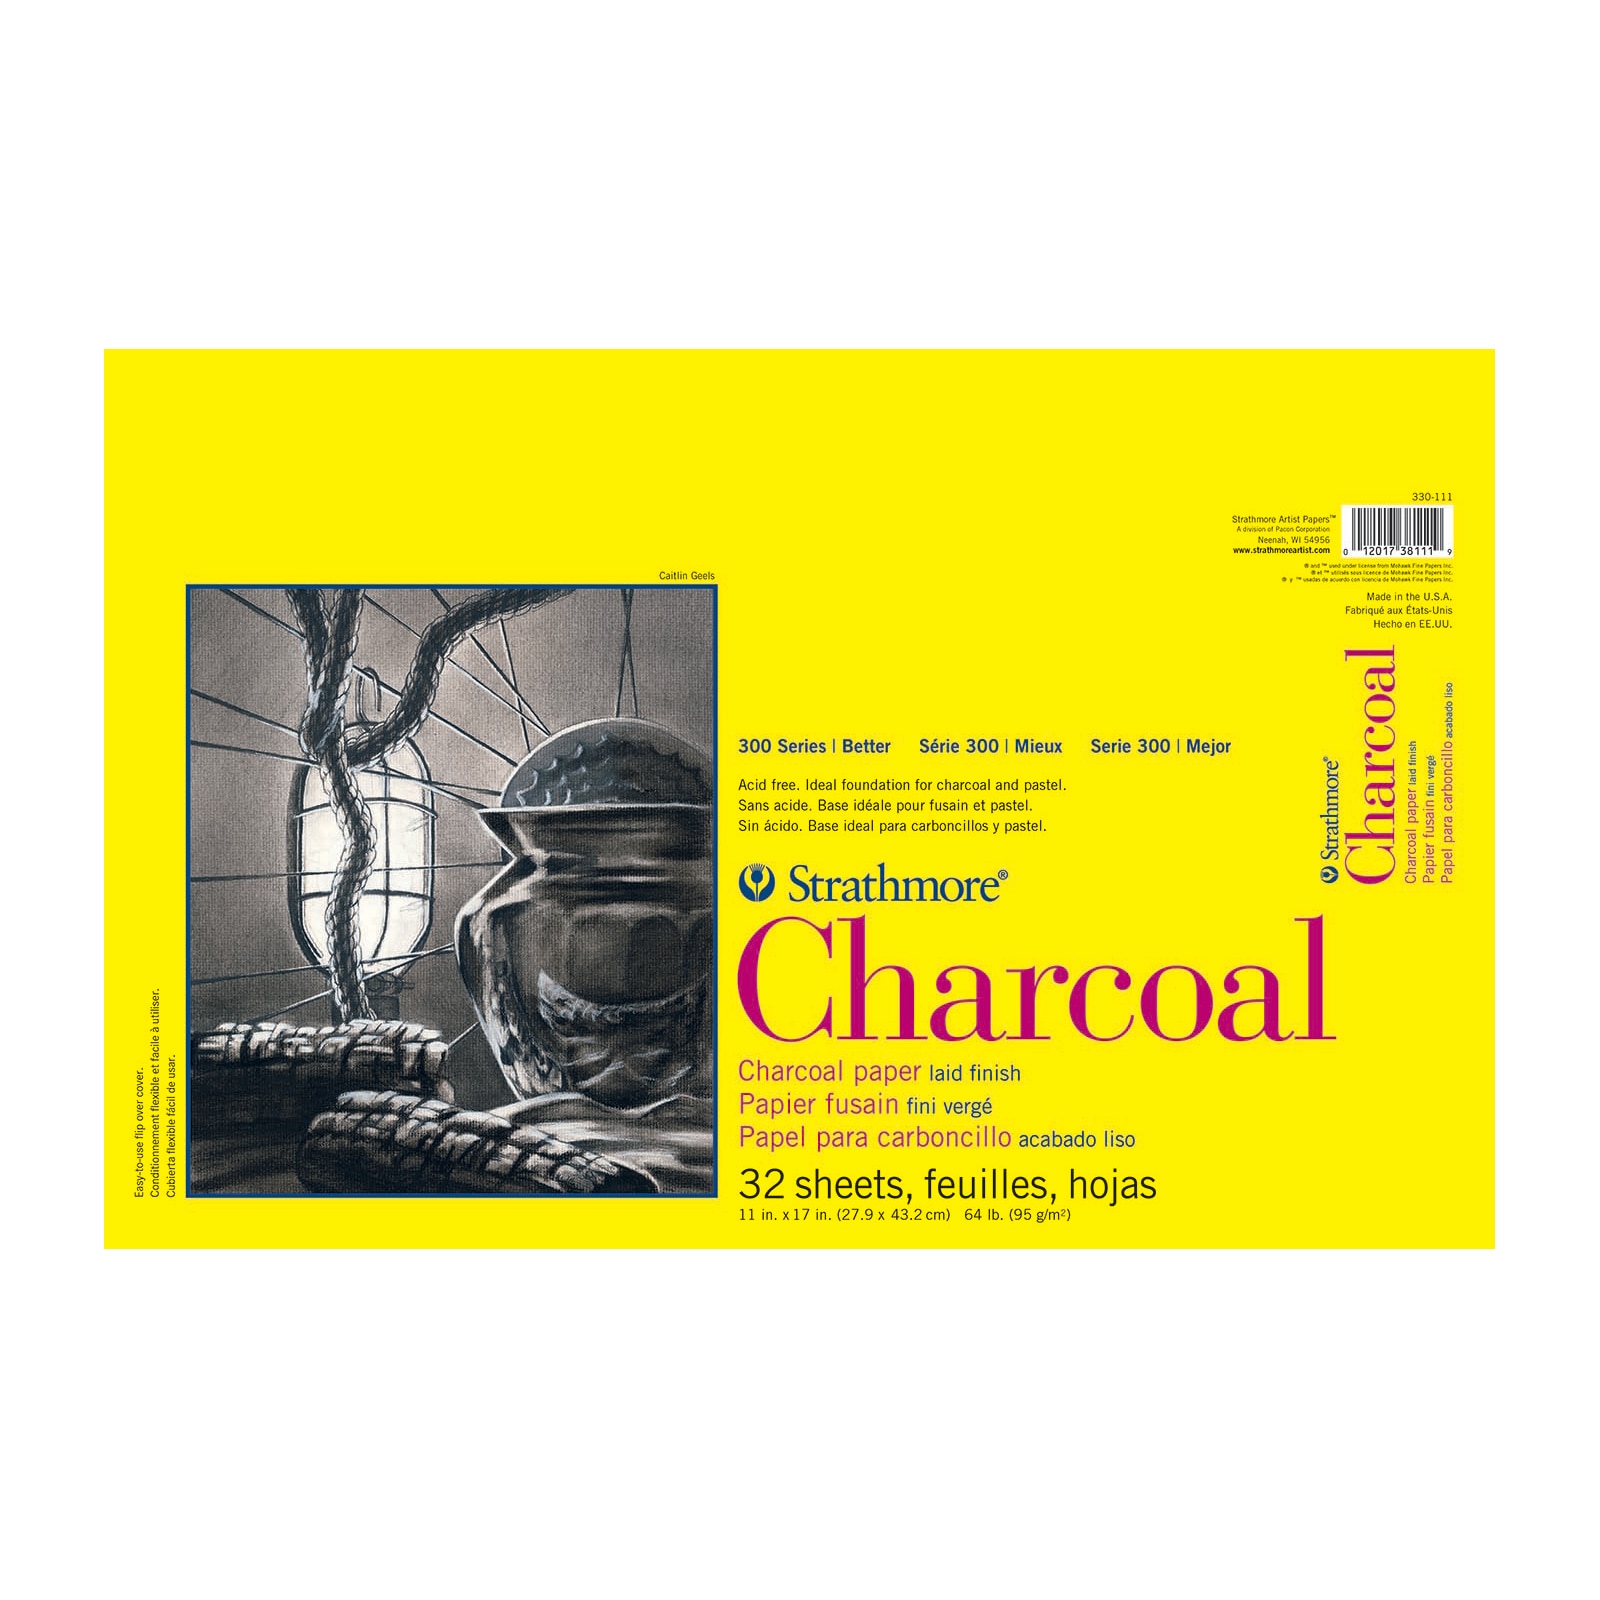 Strathmore Charcoal Paper Pad, 300 Series, 11" x 17", Tape-Bound